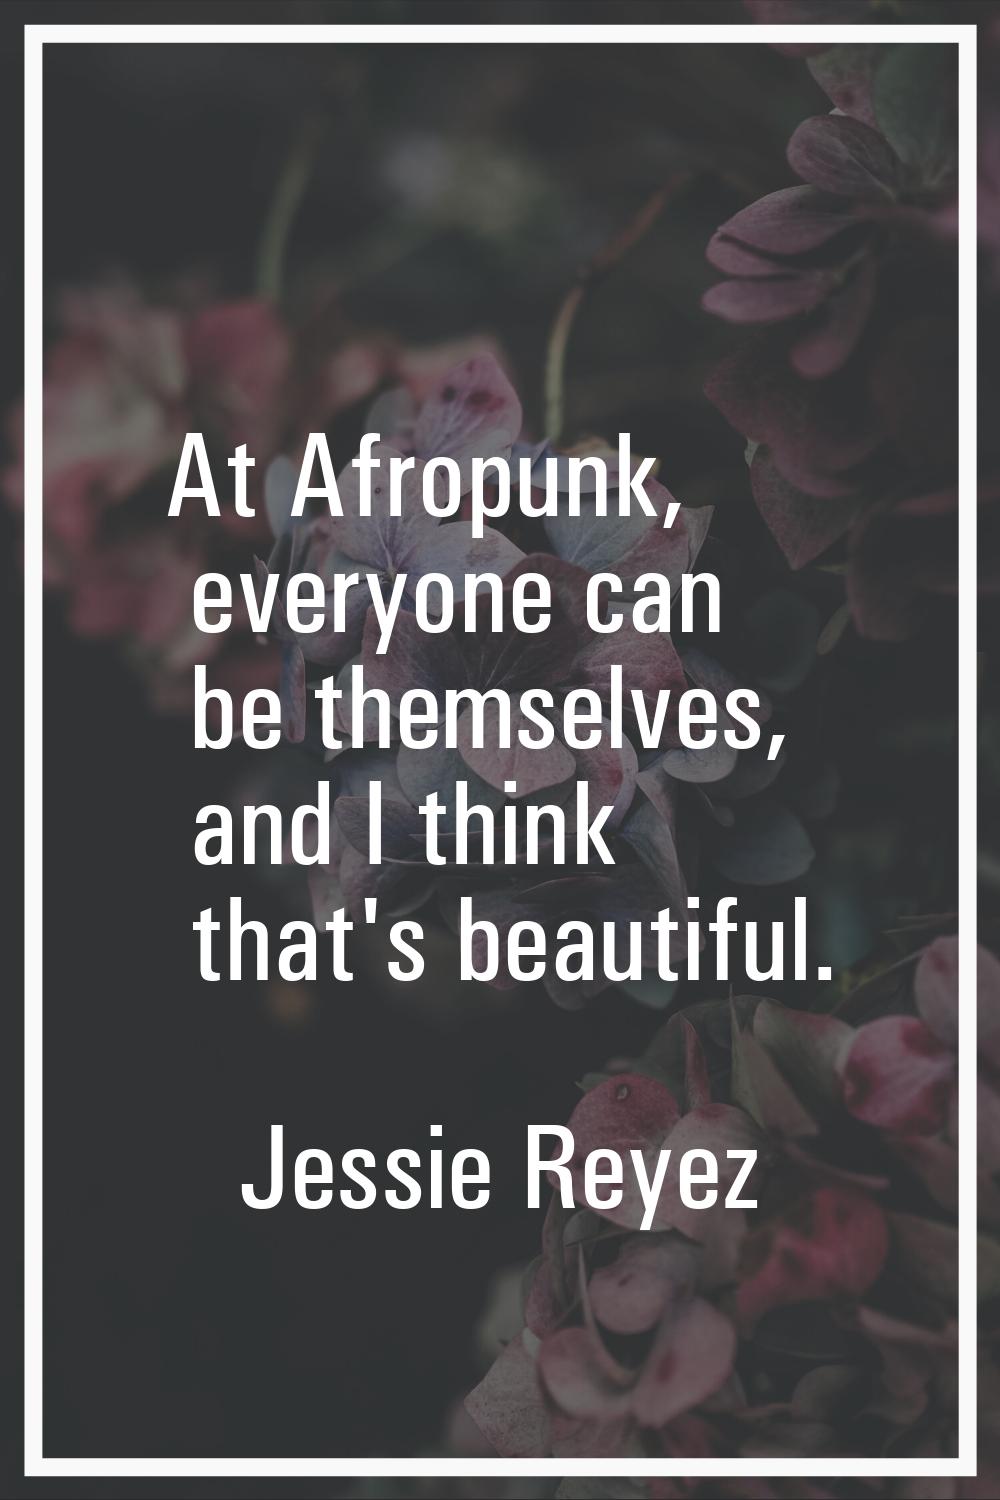 At Afropunk, everyone can be themselves, and I think that's beautiful.